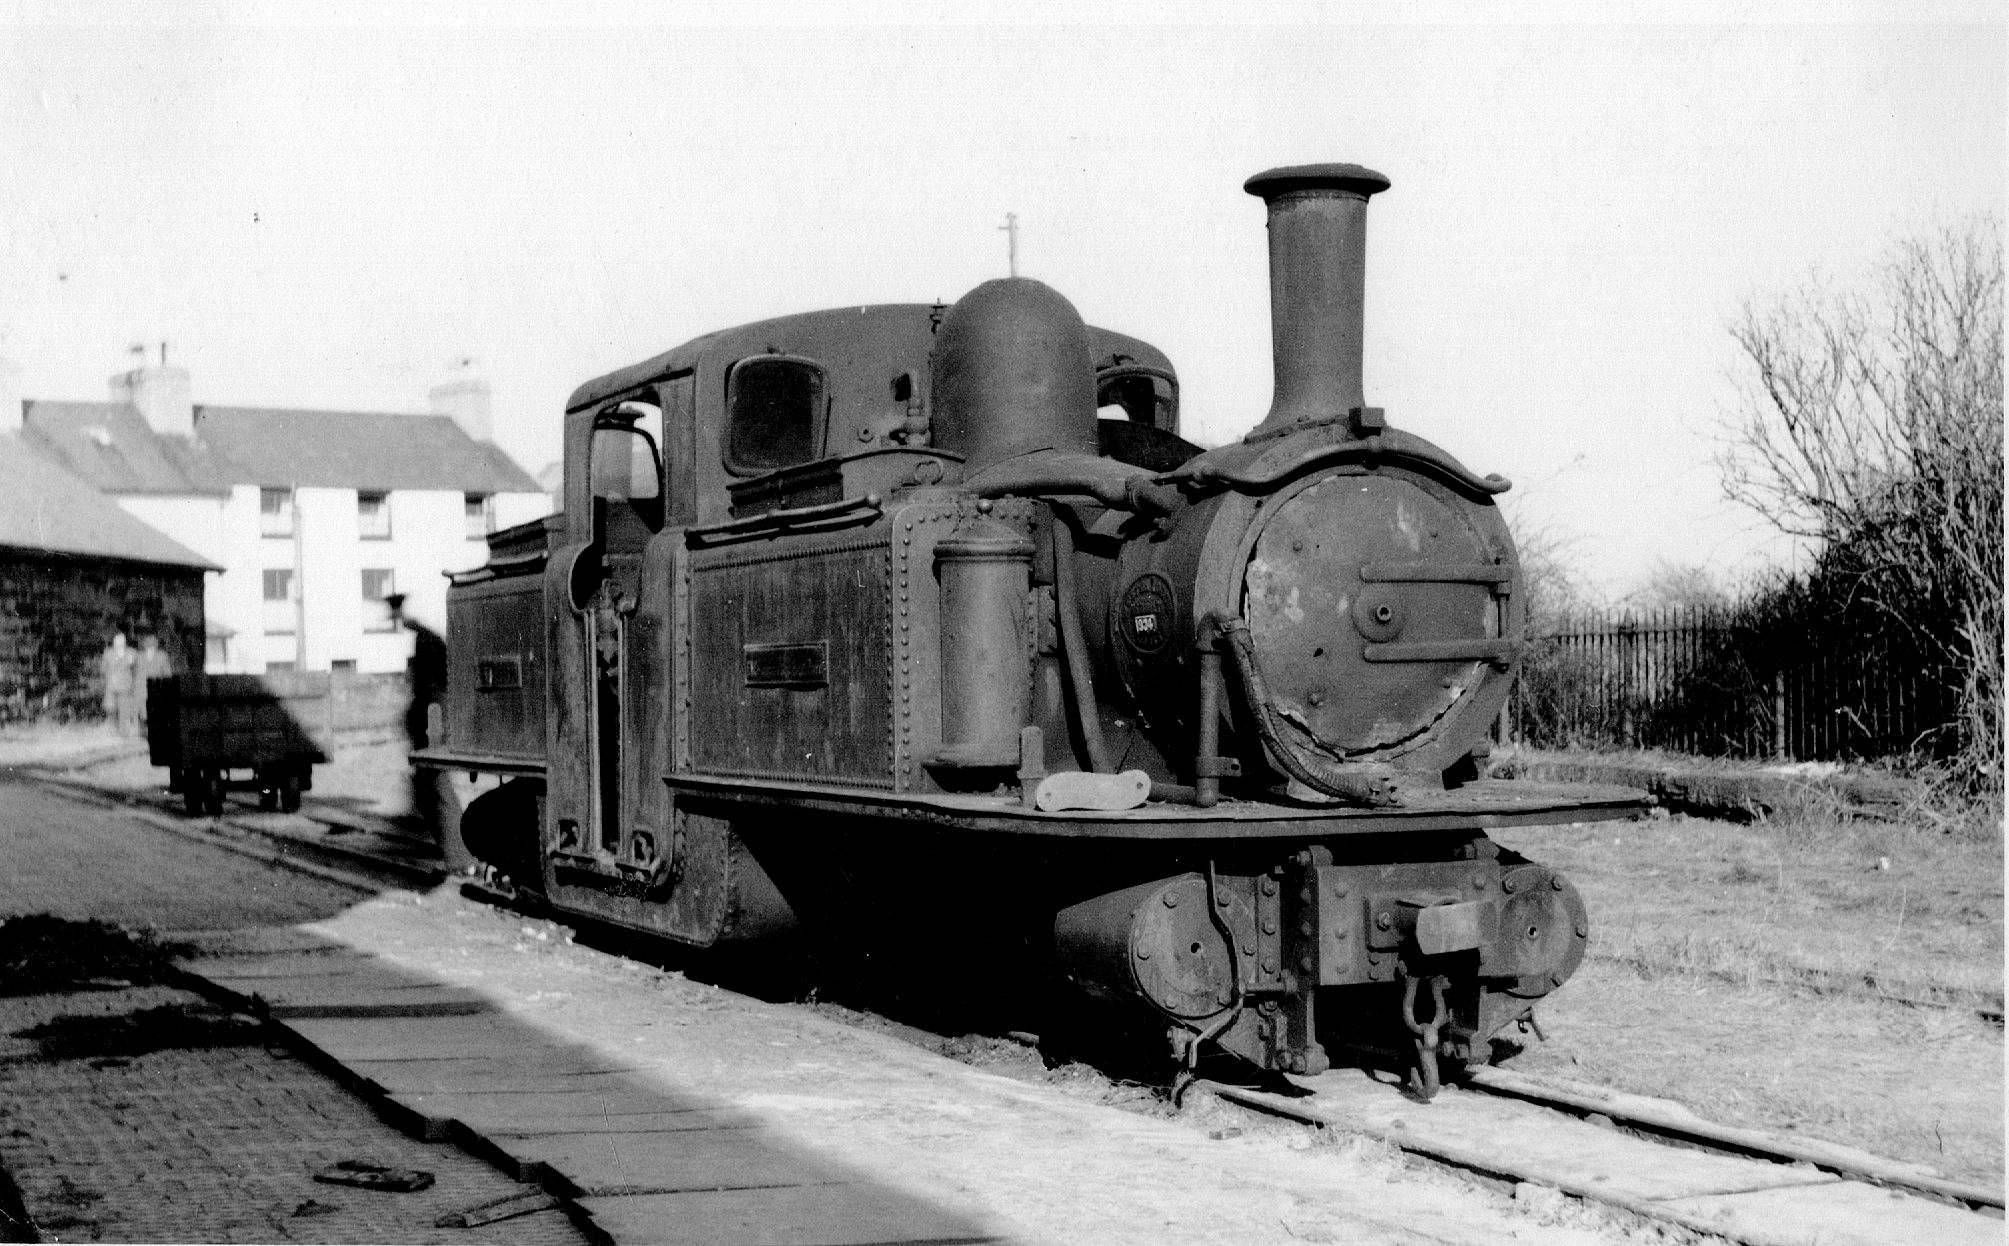 NGRS Collection 3 - Ffestiniog Rly - undated - Fairlie 0440 in delapidated state at Harbour Station Porthmadog - unknown source.jpg